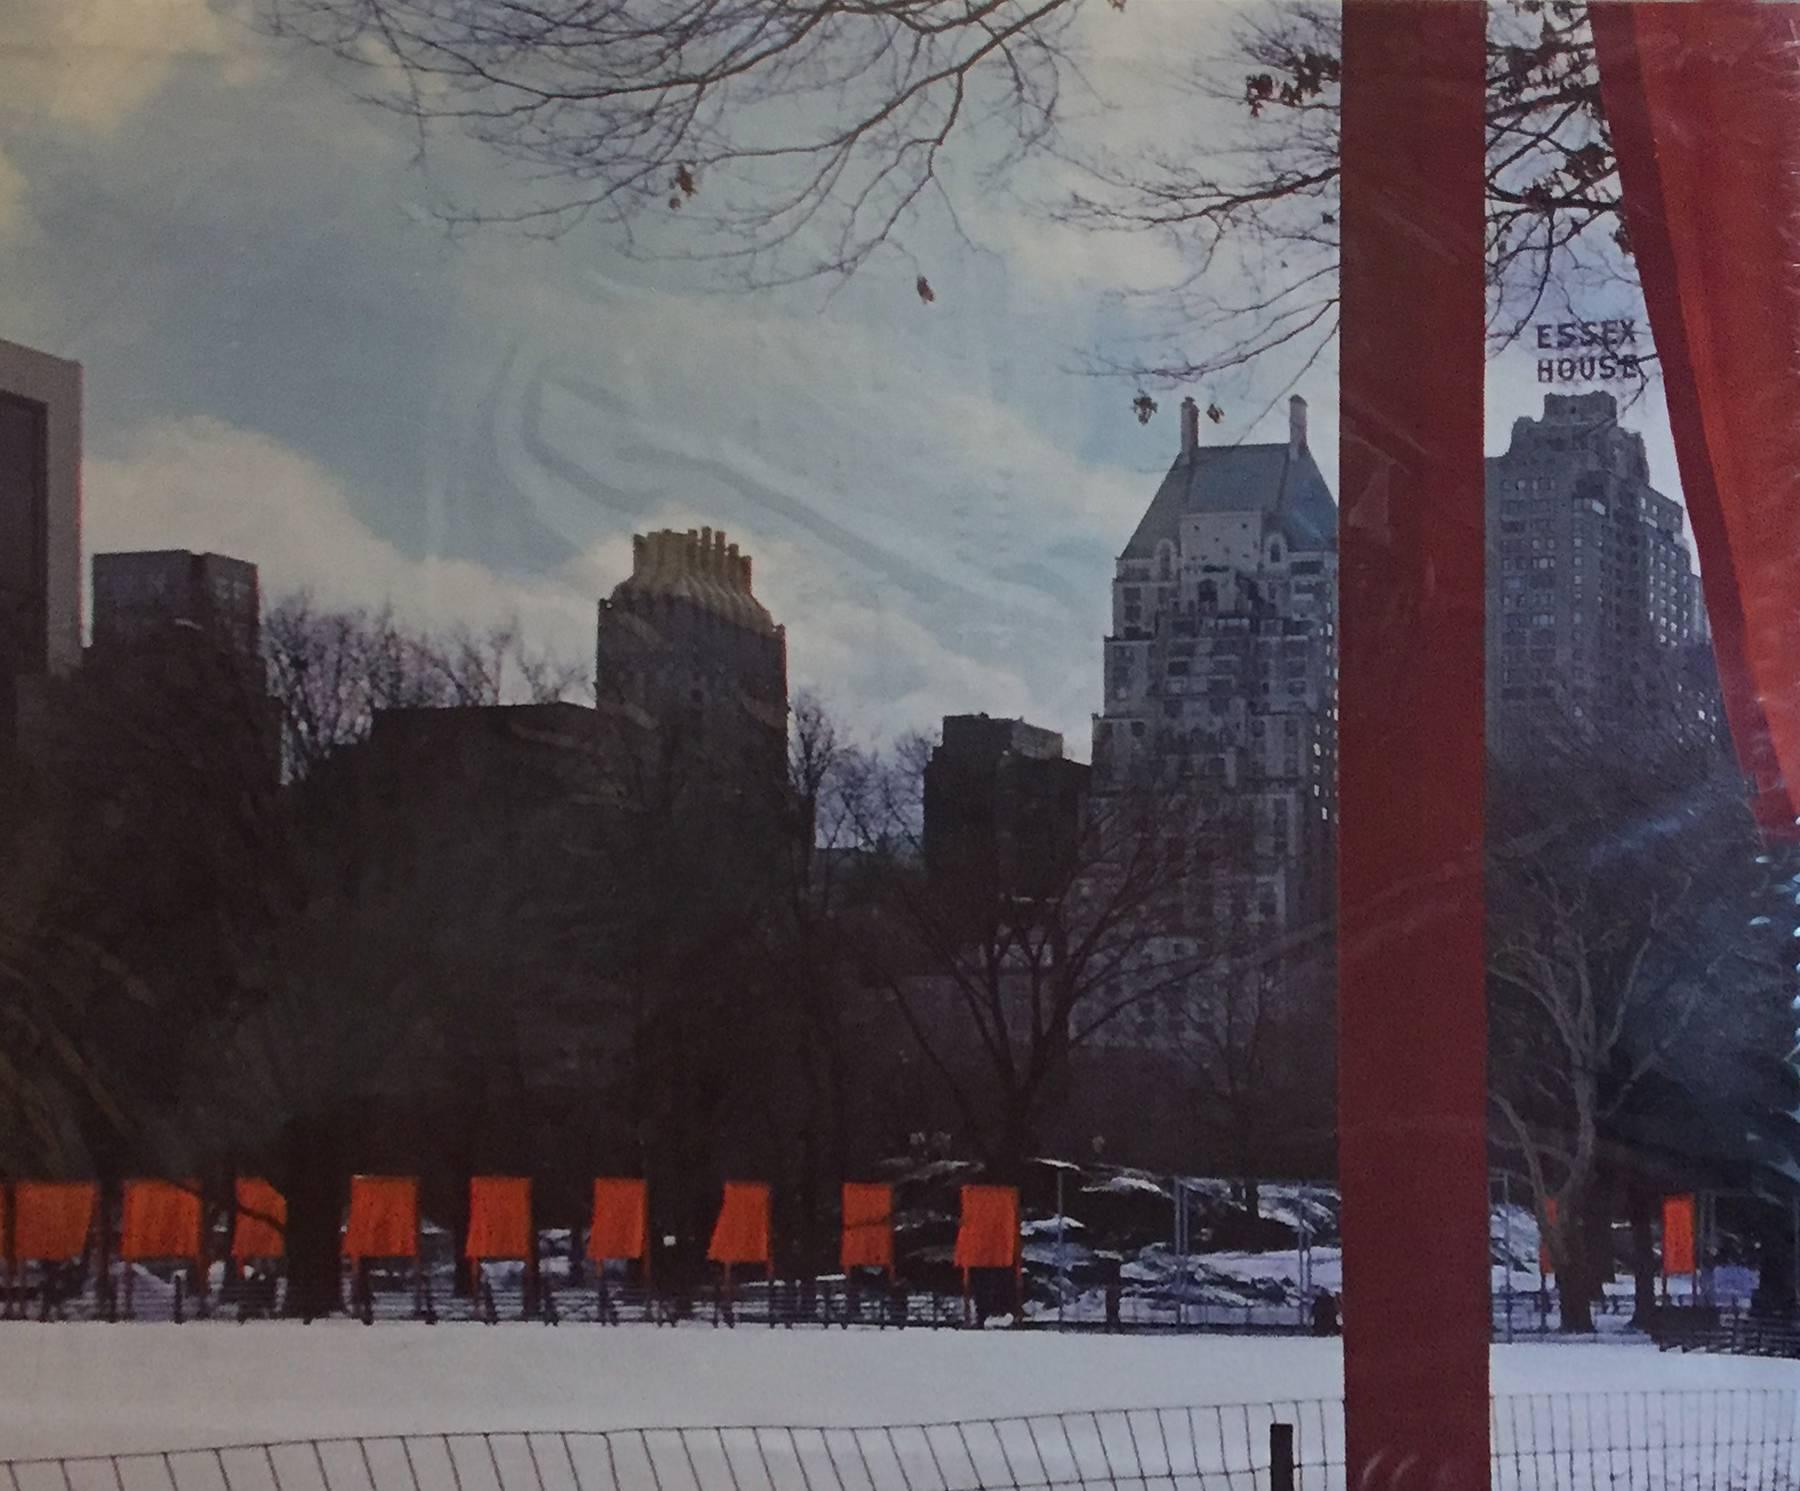 Volz, Wolfgang (photography) and Jonathan Henery (picture notes). CHRISTO and JEANNE-CLAUDE: The Gates, Central Park, New York City 1979-2005. 967 pp., over 1,000 color and b&w illustrations. 4to, cloth in slipcase. Koln, London, Los Angeles,